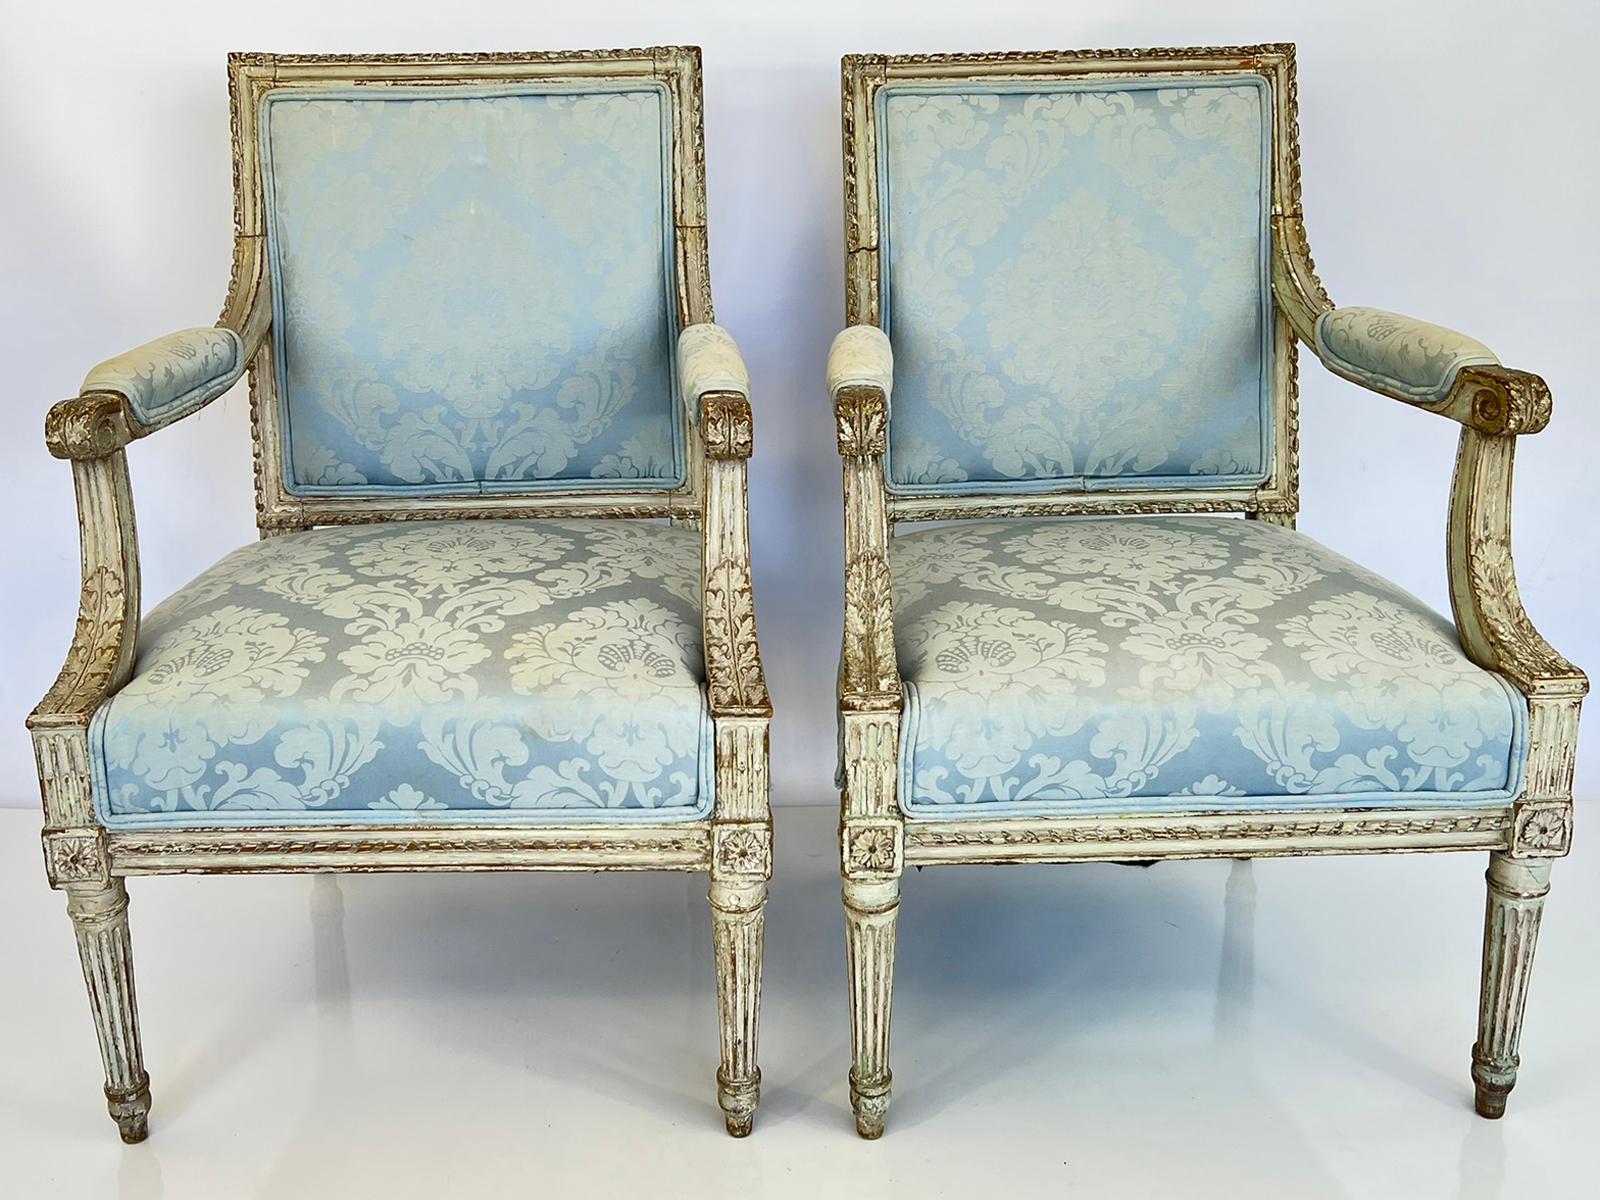 Pair of Louis XVI fauteuils, having their original putty-gray painted finish. Each armchair has a squared, padded backrest, in a channeled frame with a gadrooned border. The downswept armrests with padded elbow cushions, ending in scrolls, and